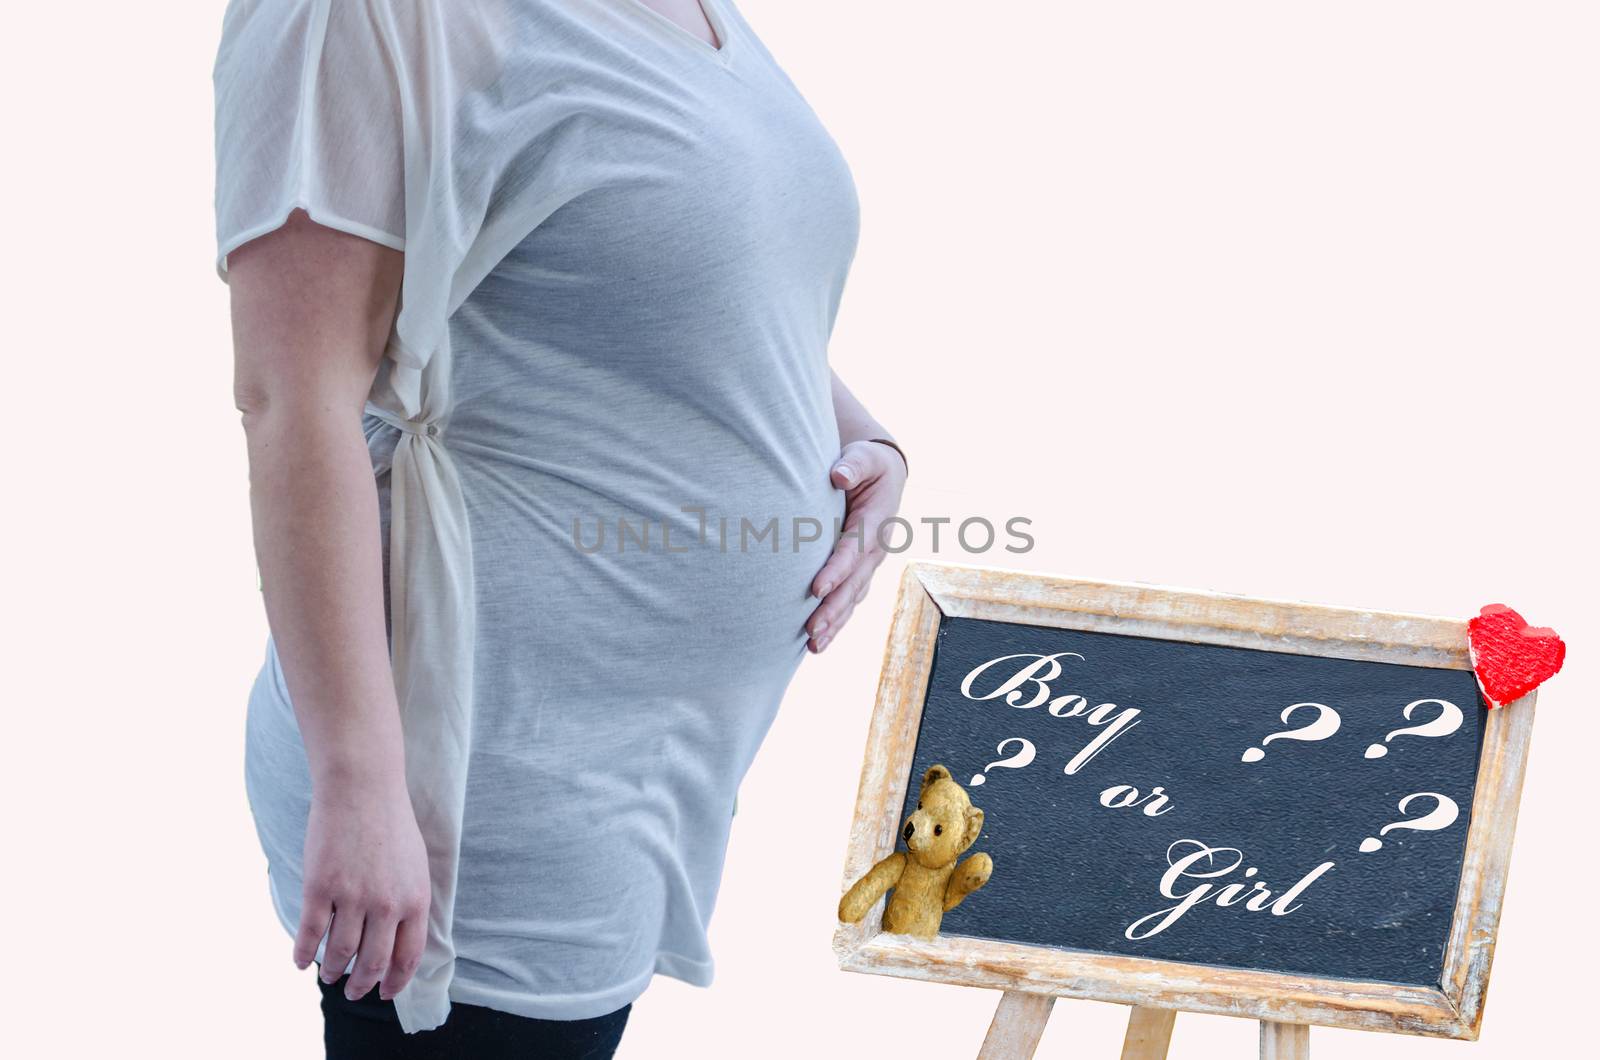 Upper body of a pregnant woman against a white background